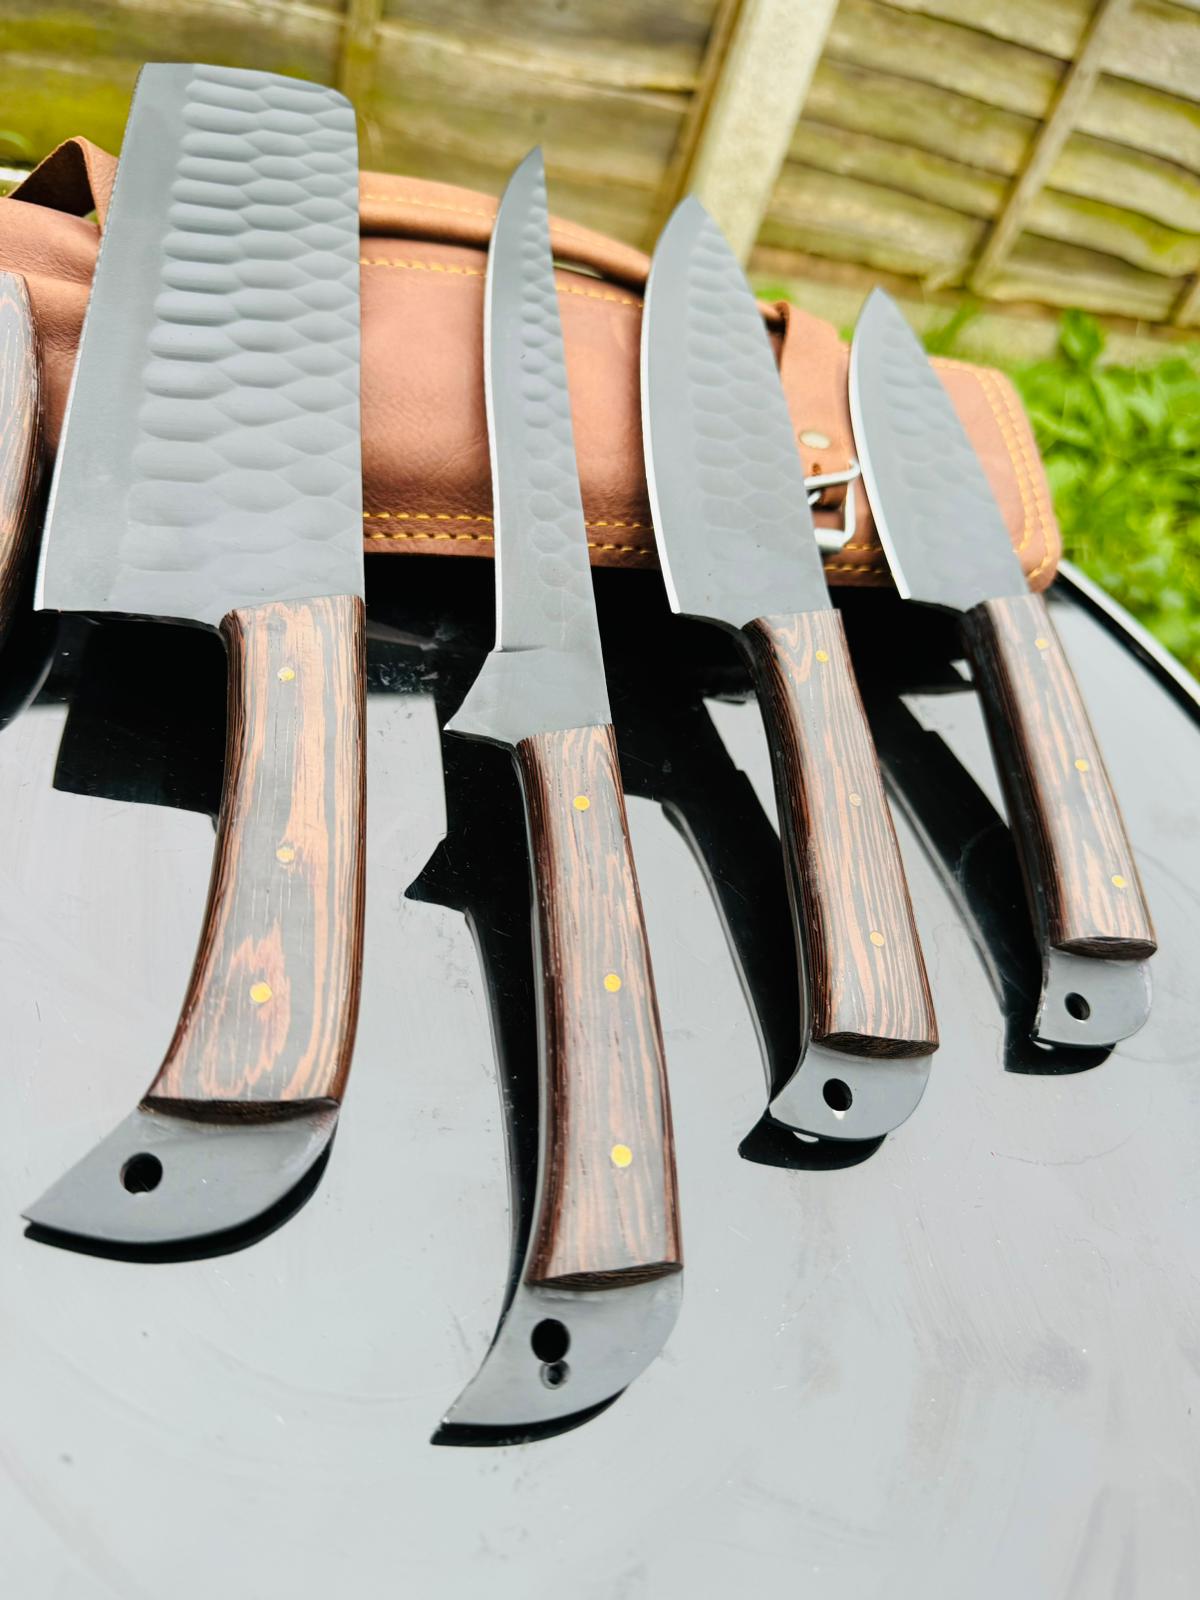 Handmade Chef Set Carbon Steel Kitchen Knives Set, Best gift for her, Mothers day gift, chef, kitchen beauty, black beauty